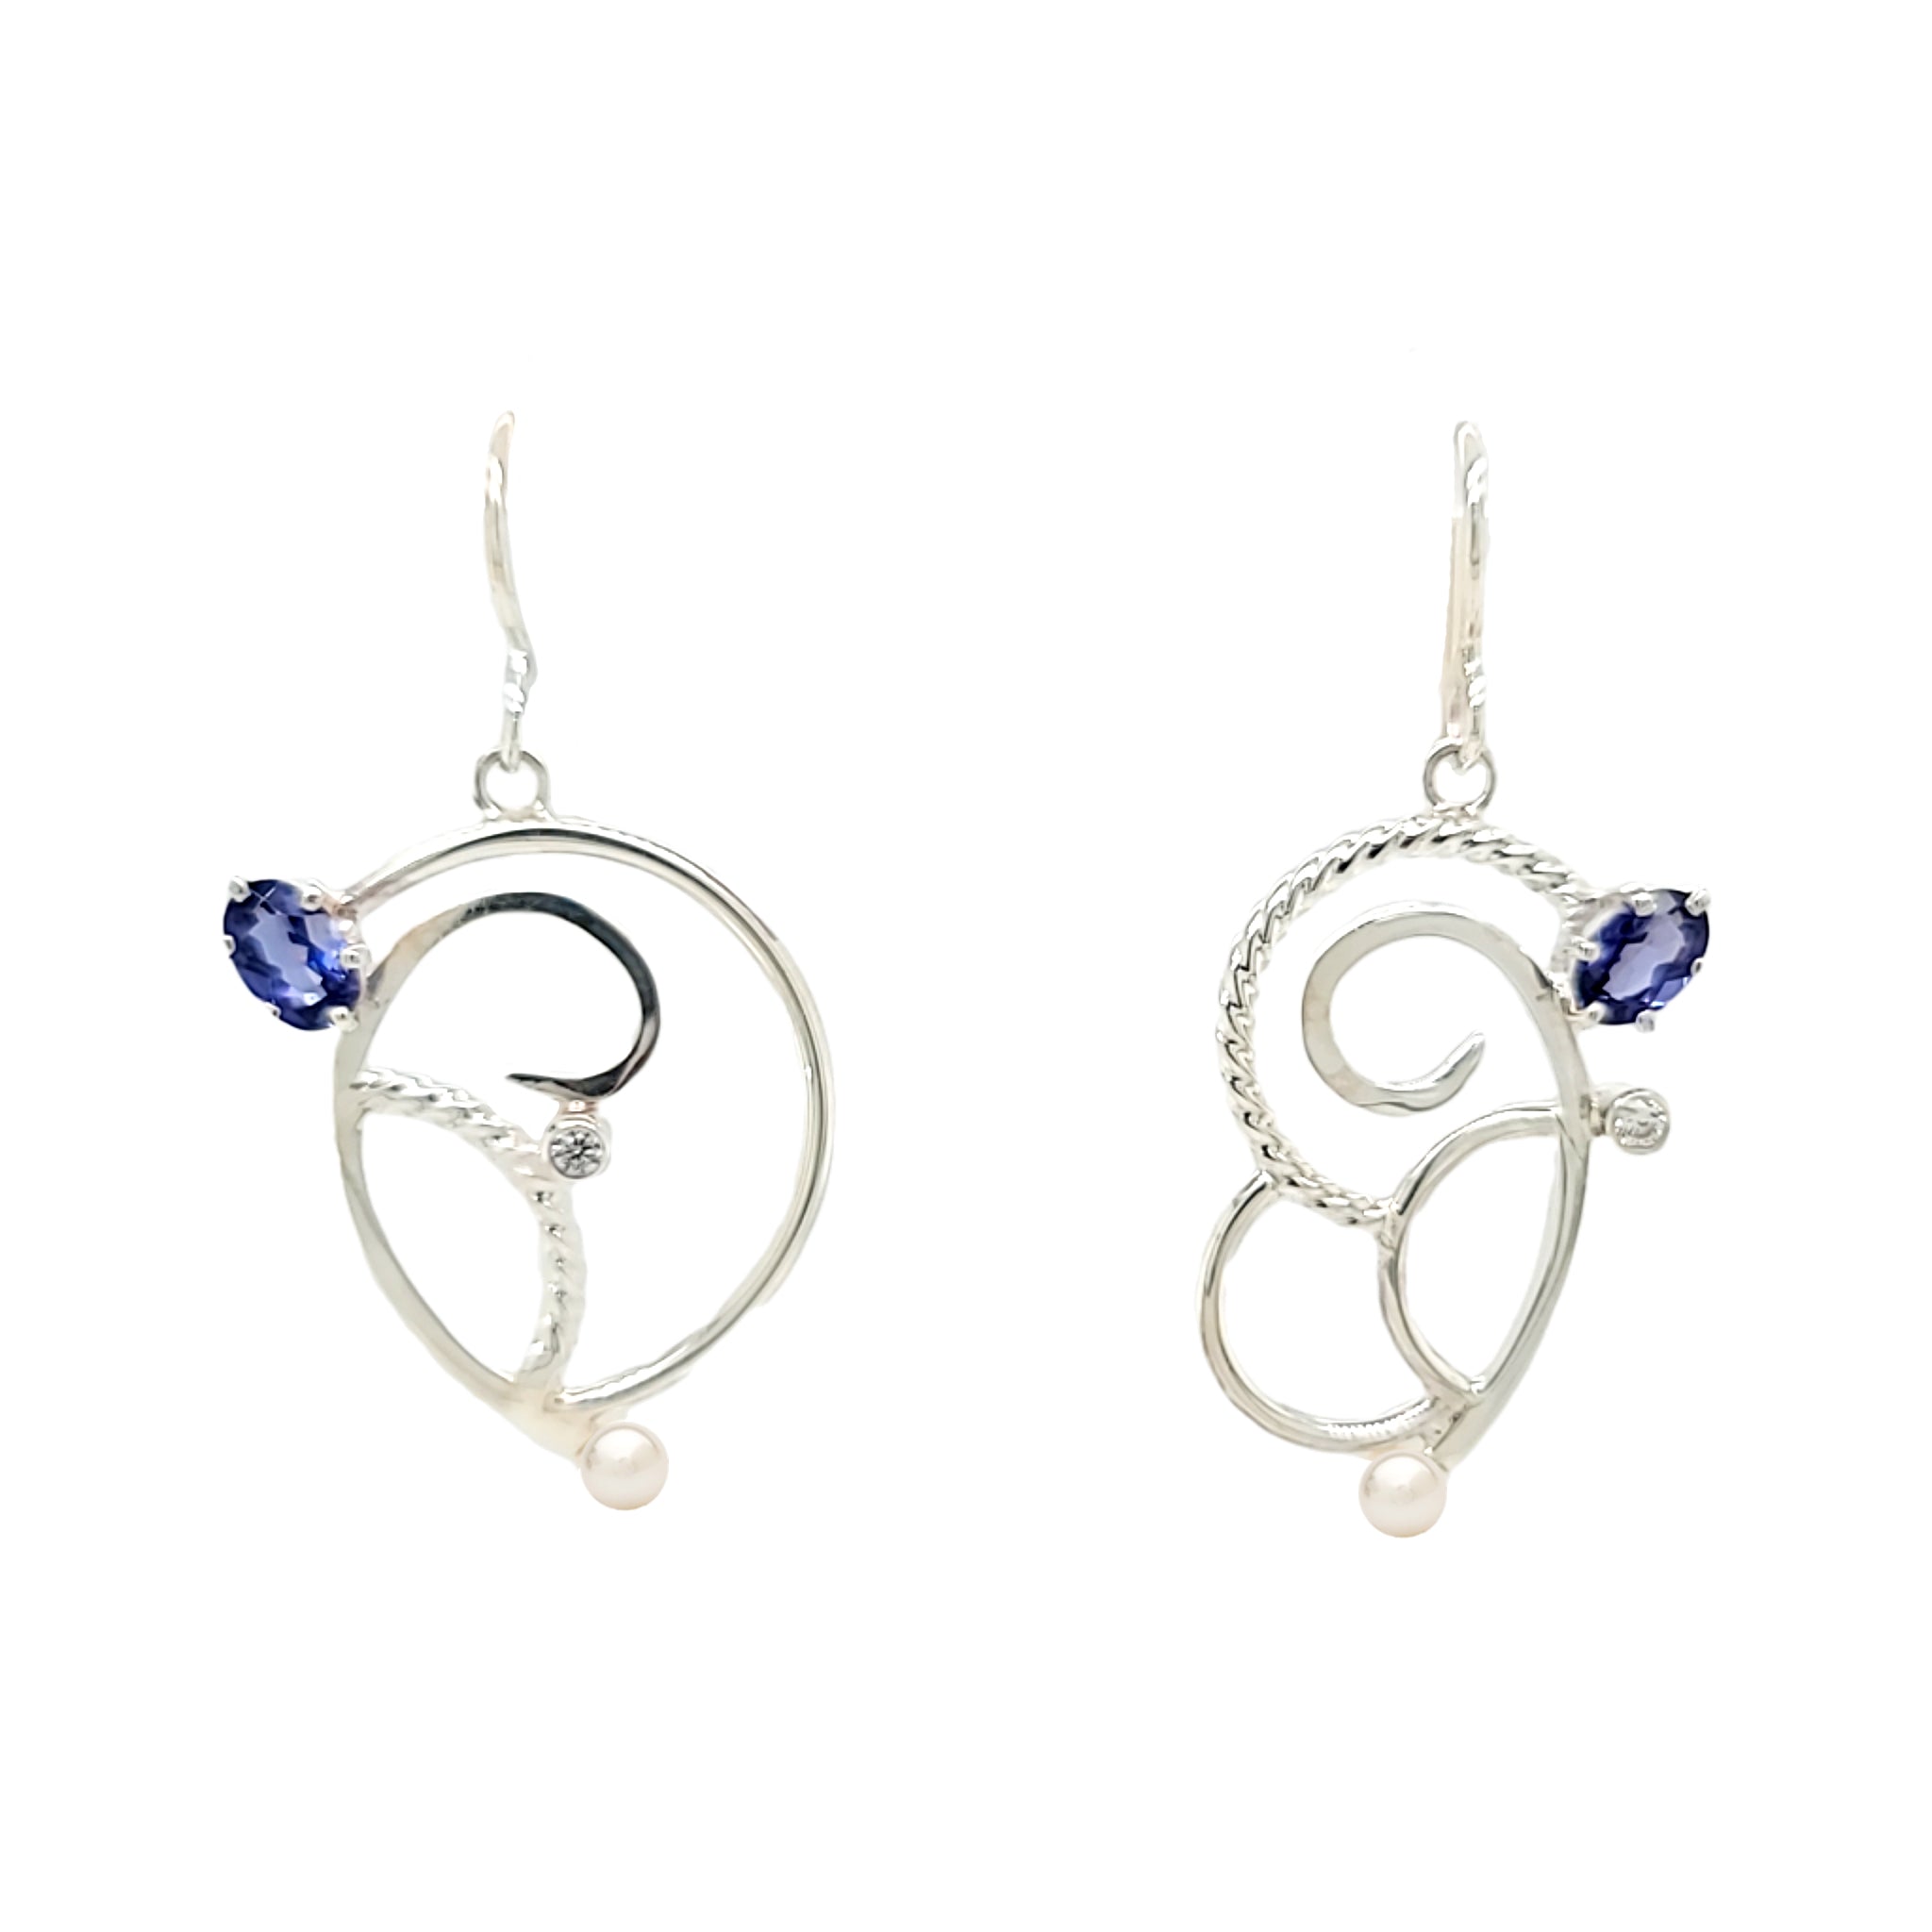 Asymmetric Sterling Silver earrings with Iolite, Cubic Zirconia and Freshwater Pearls.